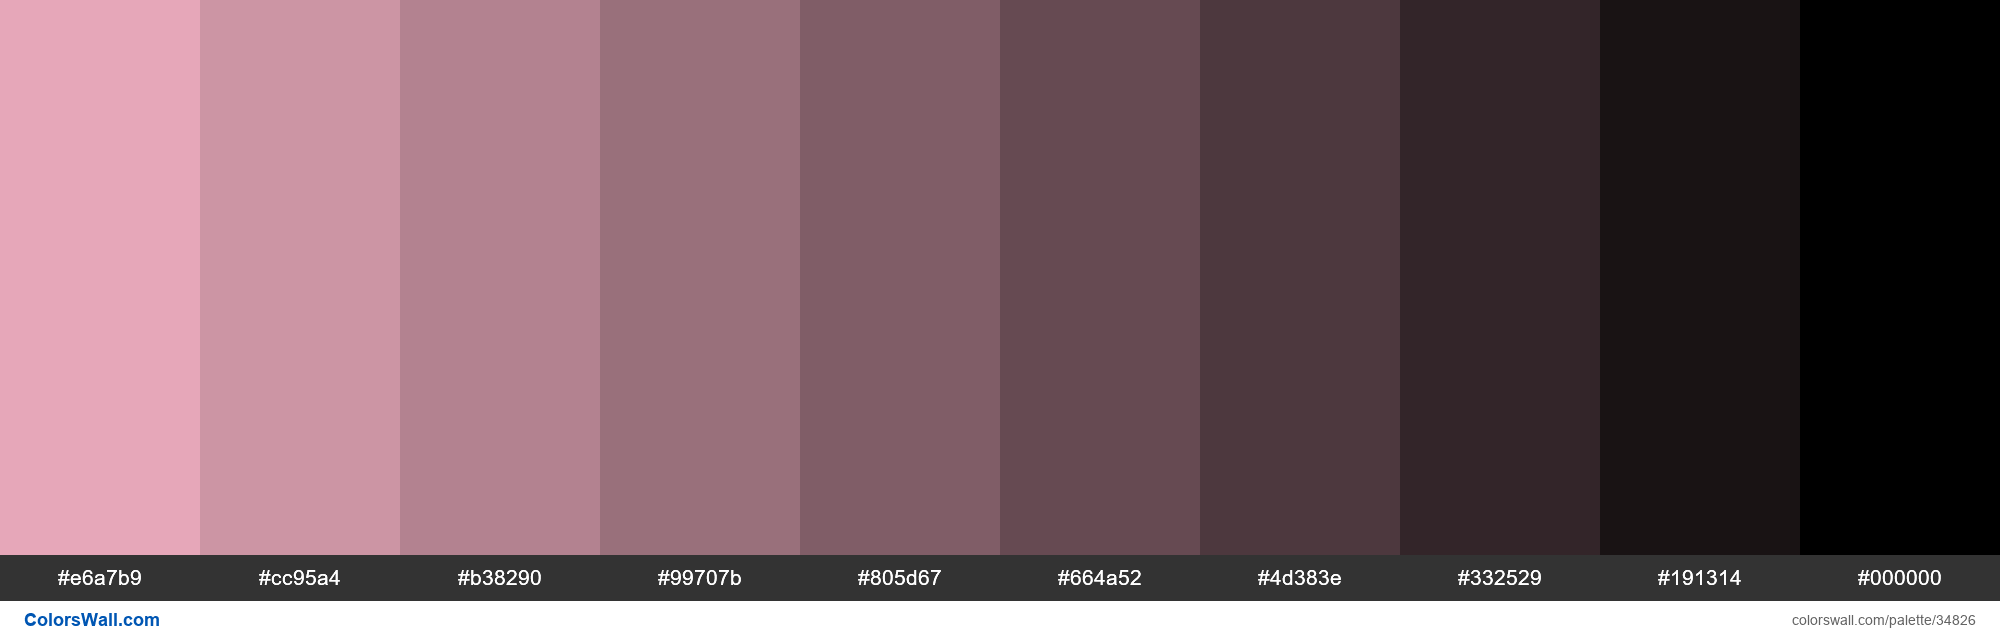 Shades XKCD Color pastel pink #ffbacd hex colors palette | ColorsWall